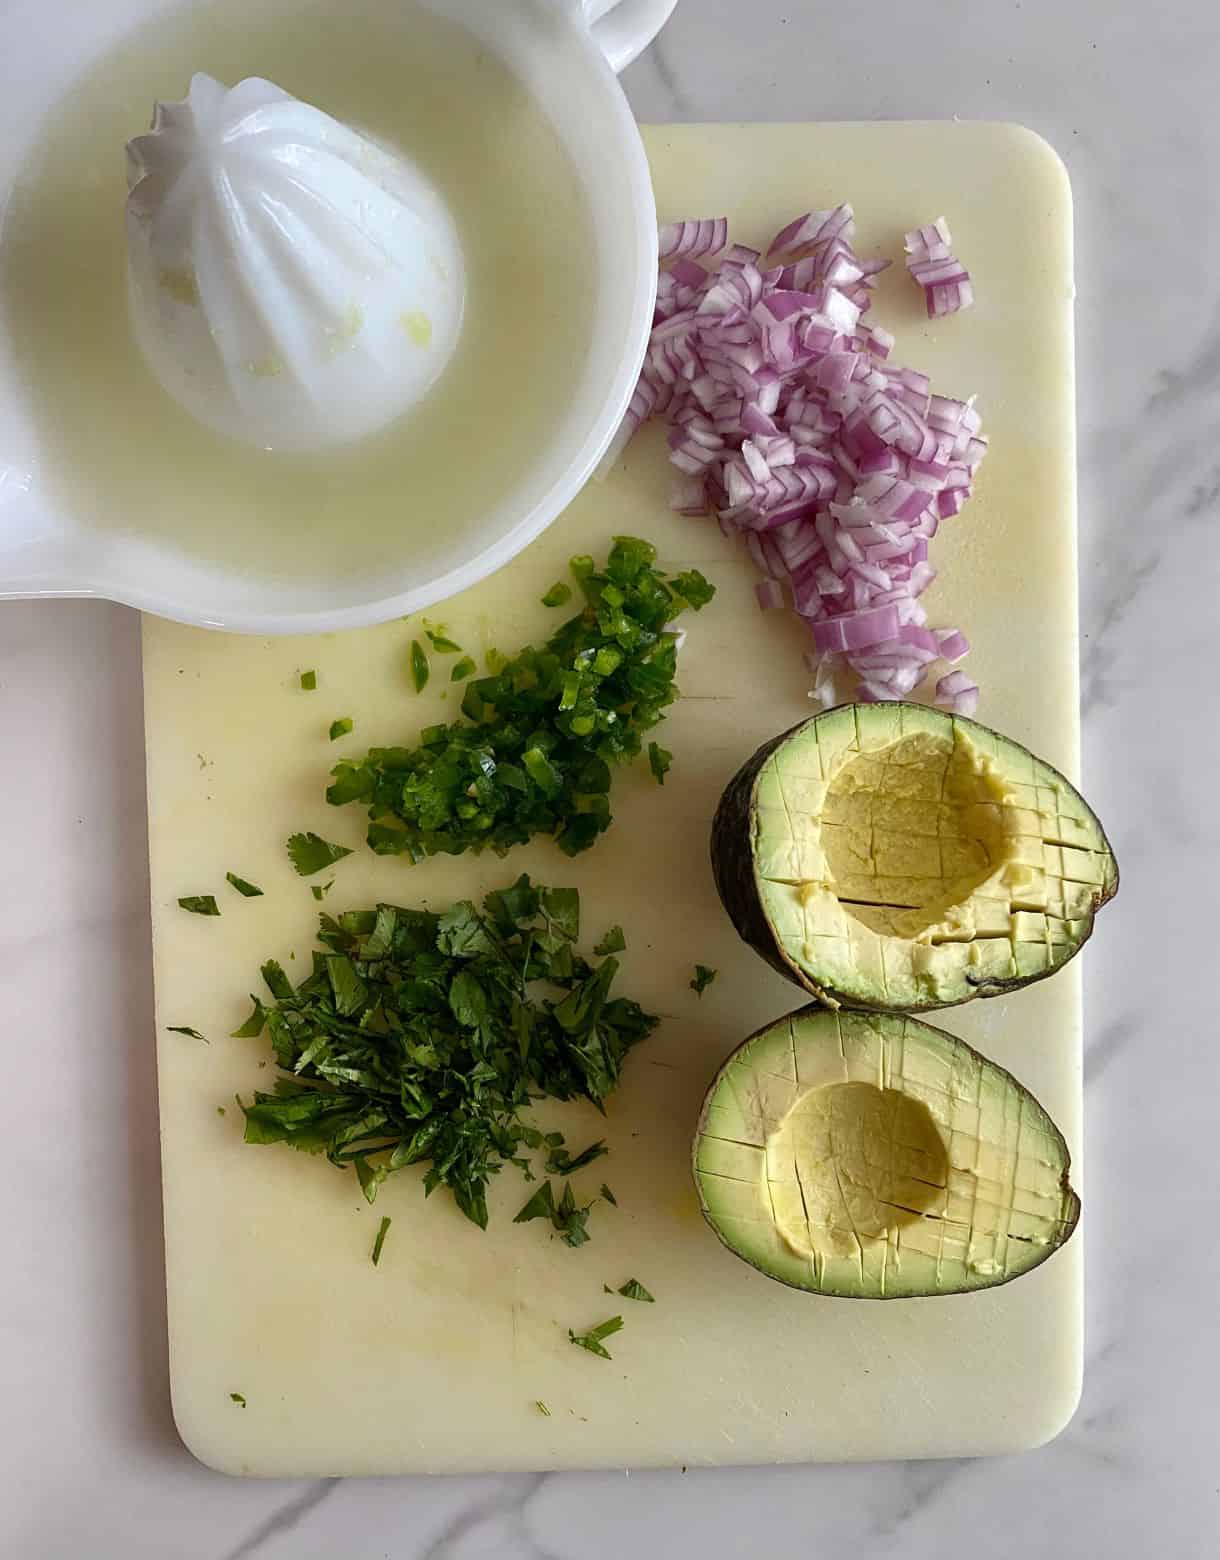 A cutting board with diced red onion, jalapeno, avocado and cilantro plus a juice press with fresh squeezed lime juice.